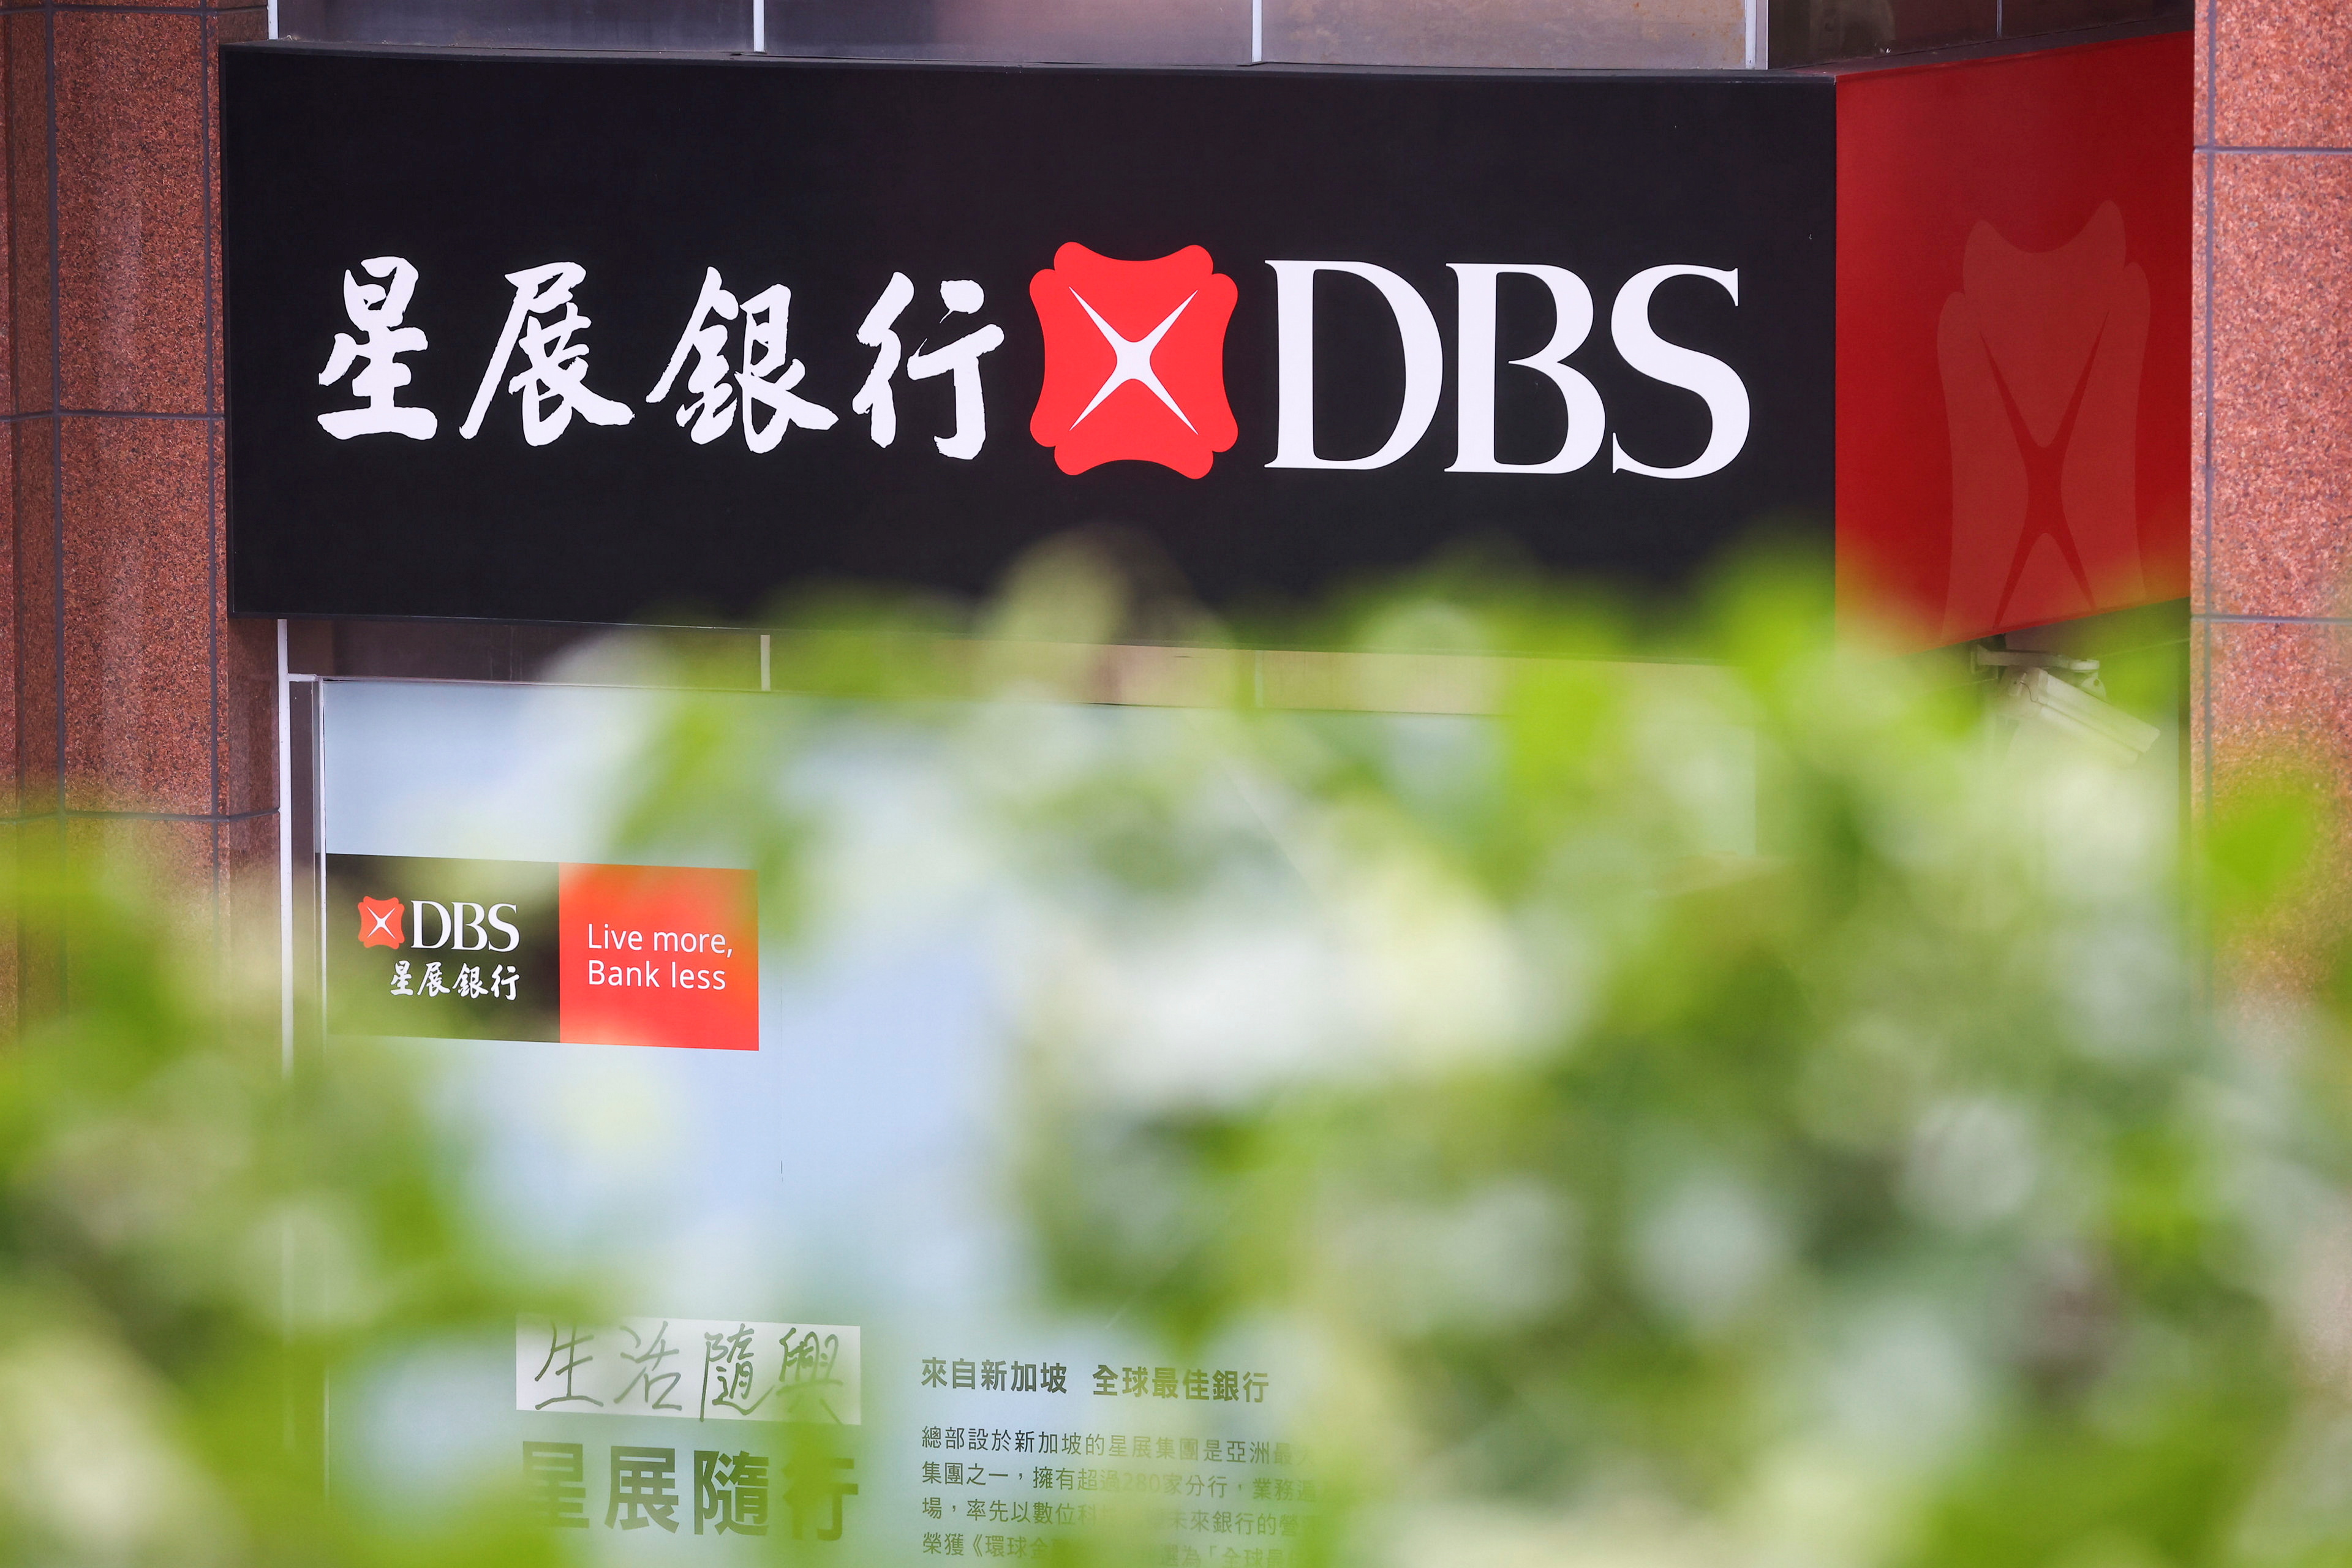 A logo of DBS bank is seen in Taipei